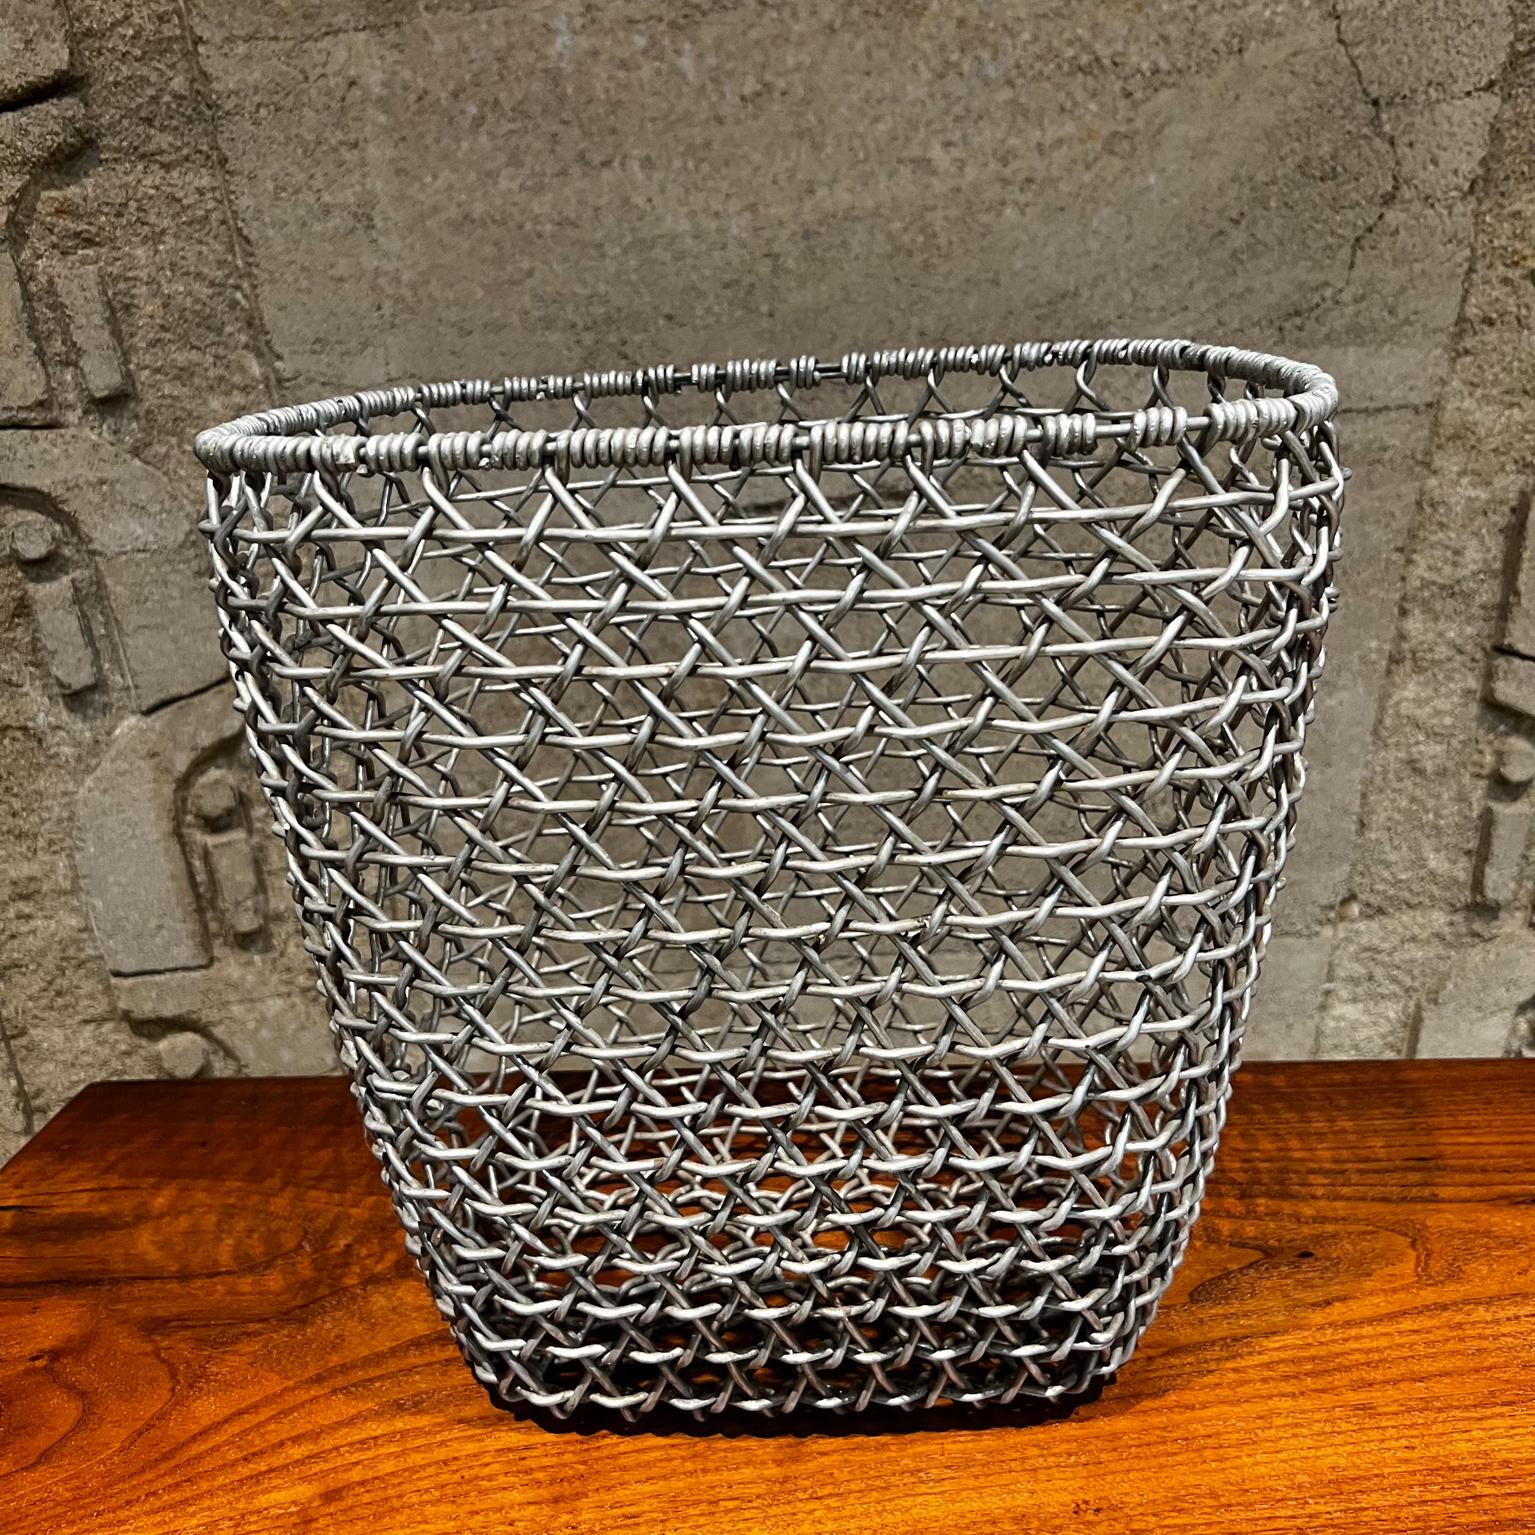 1970s Wire Basket Woven Aluminum Modern Waste Basket Container
Vintage Aluminum
Unmarked
Original vintage preowned unrestored condition. Presents firm and sturdy.
Measures: 12.75 H x 13.25 W x 10.25 D inches
Refer to images listed.

